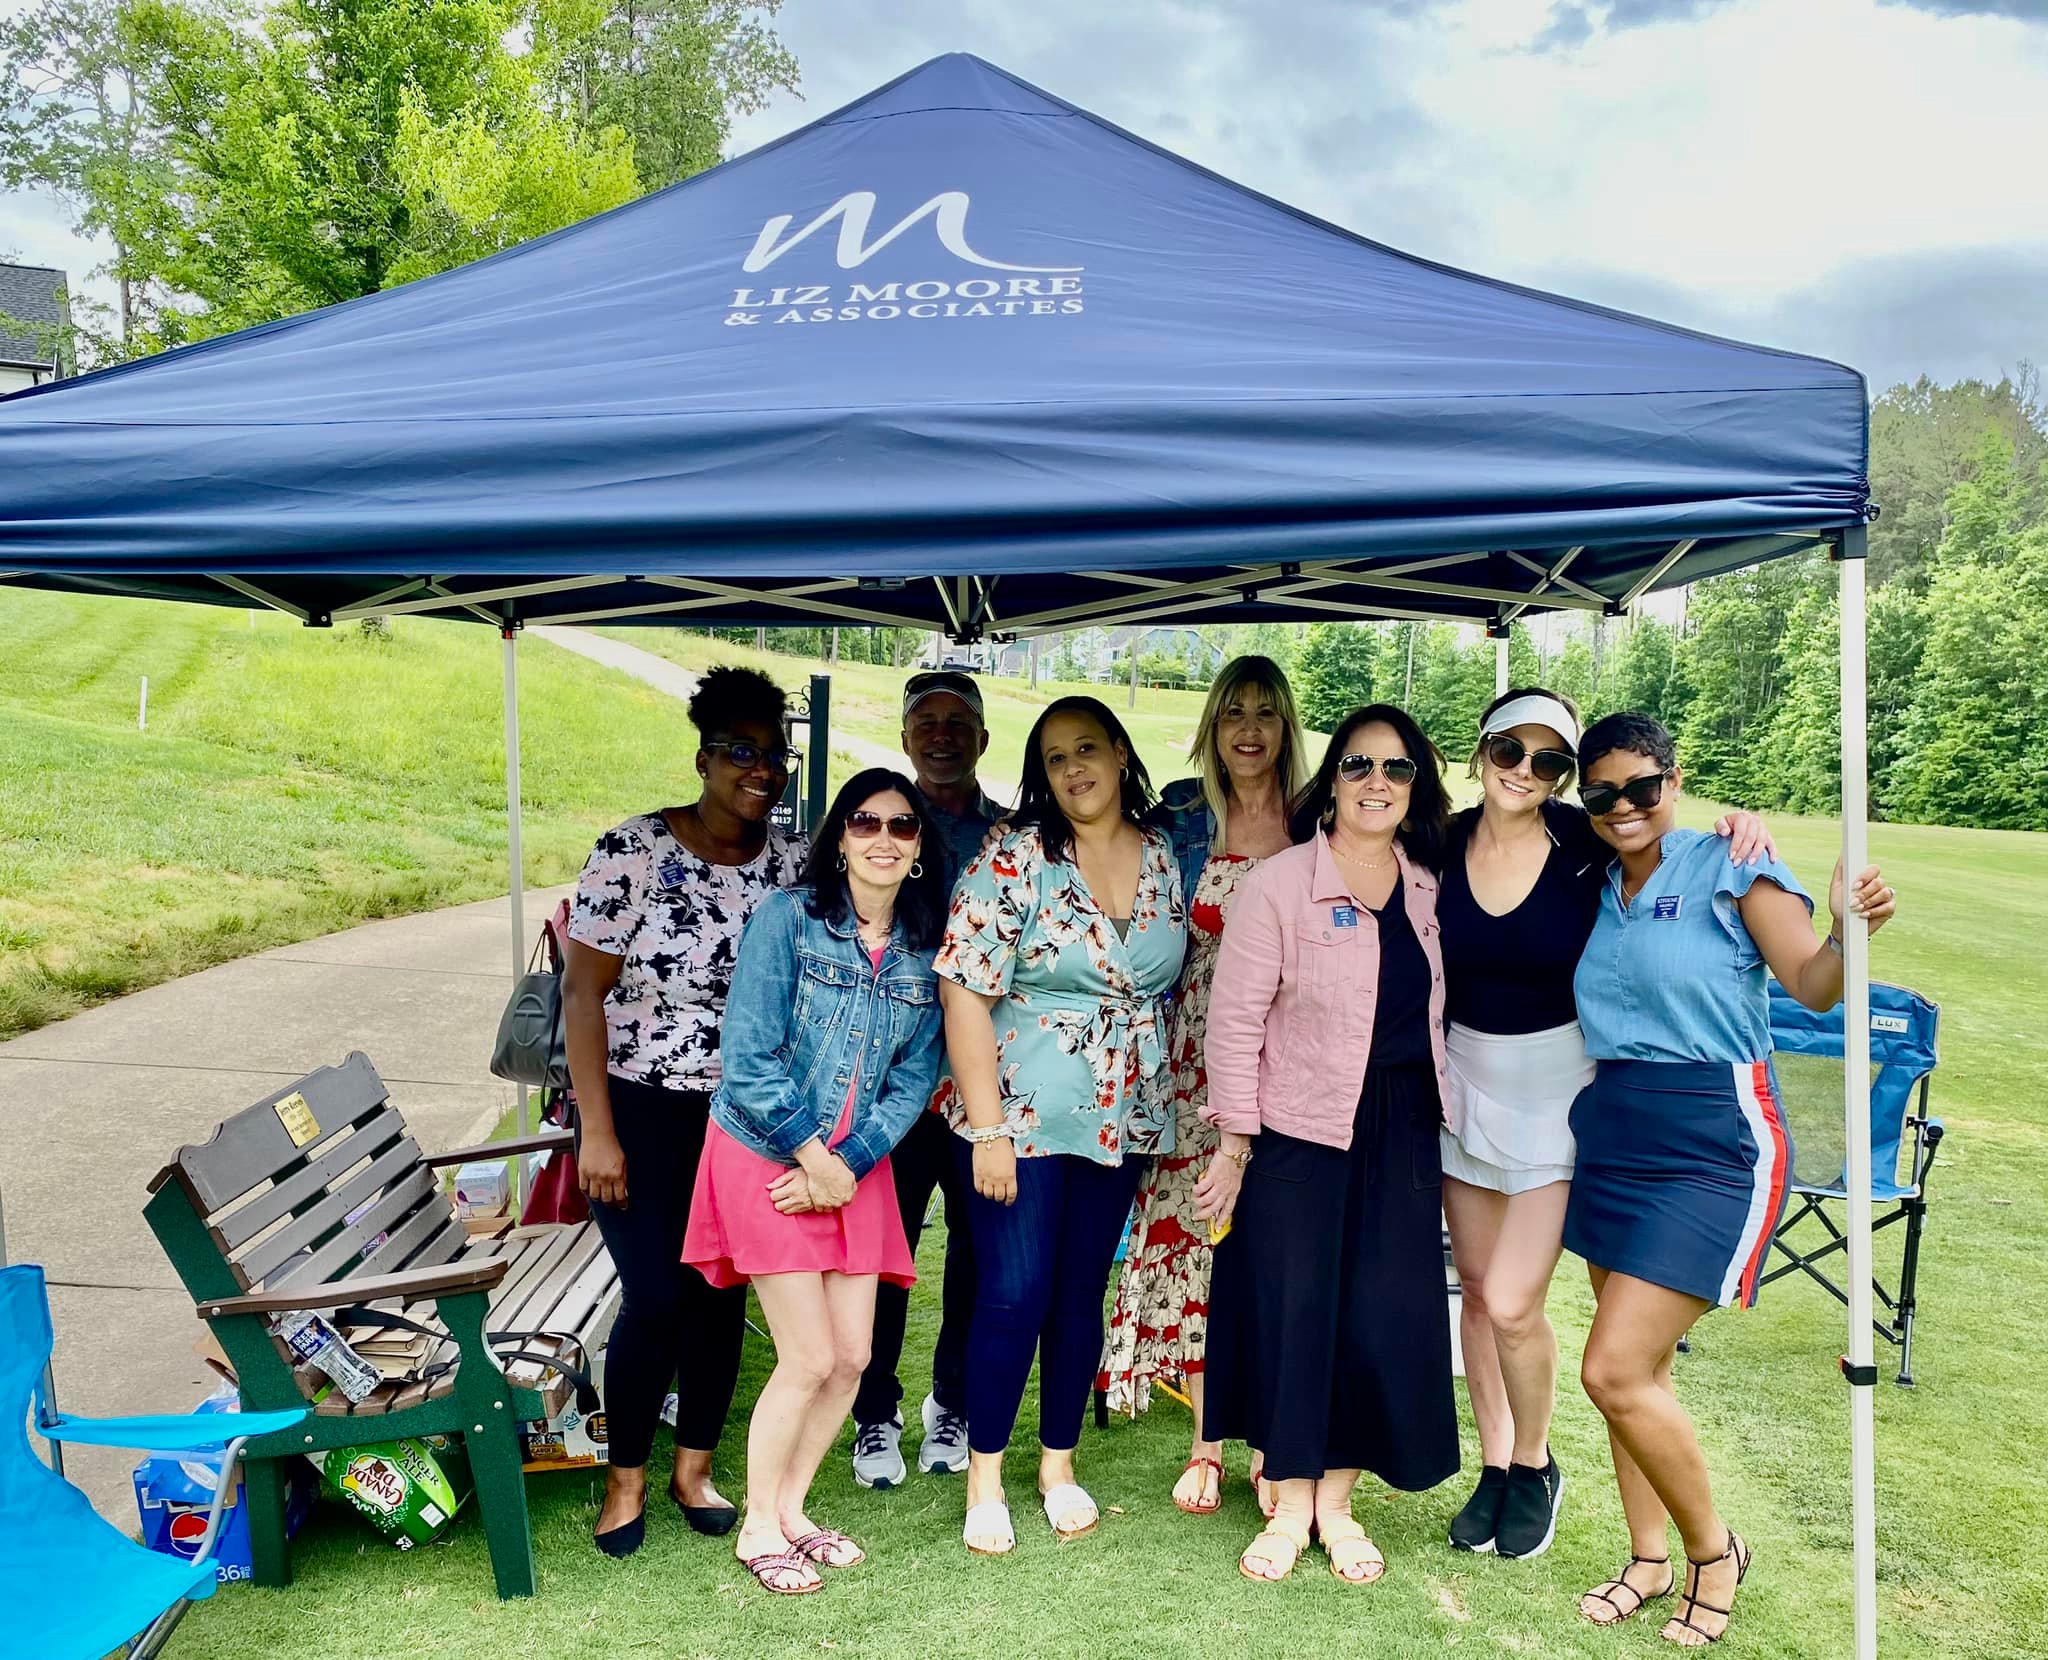 Liz Moore & Associates Richmond Office Sponsors 8th Tee at The Darrell Green Youth Life Foundation Celebrity Golf Tournament